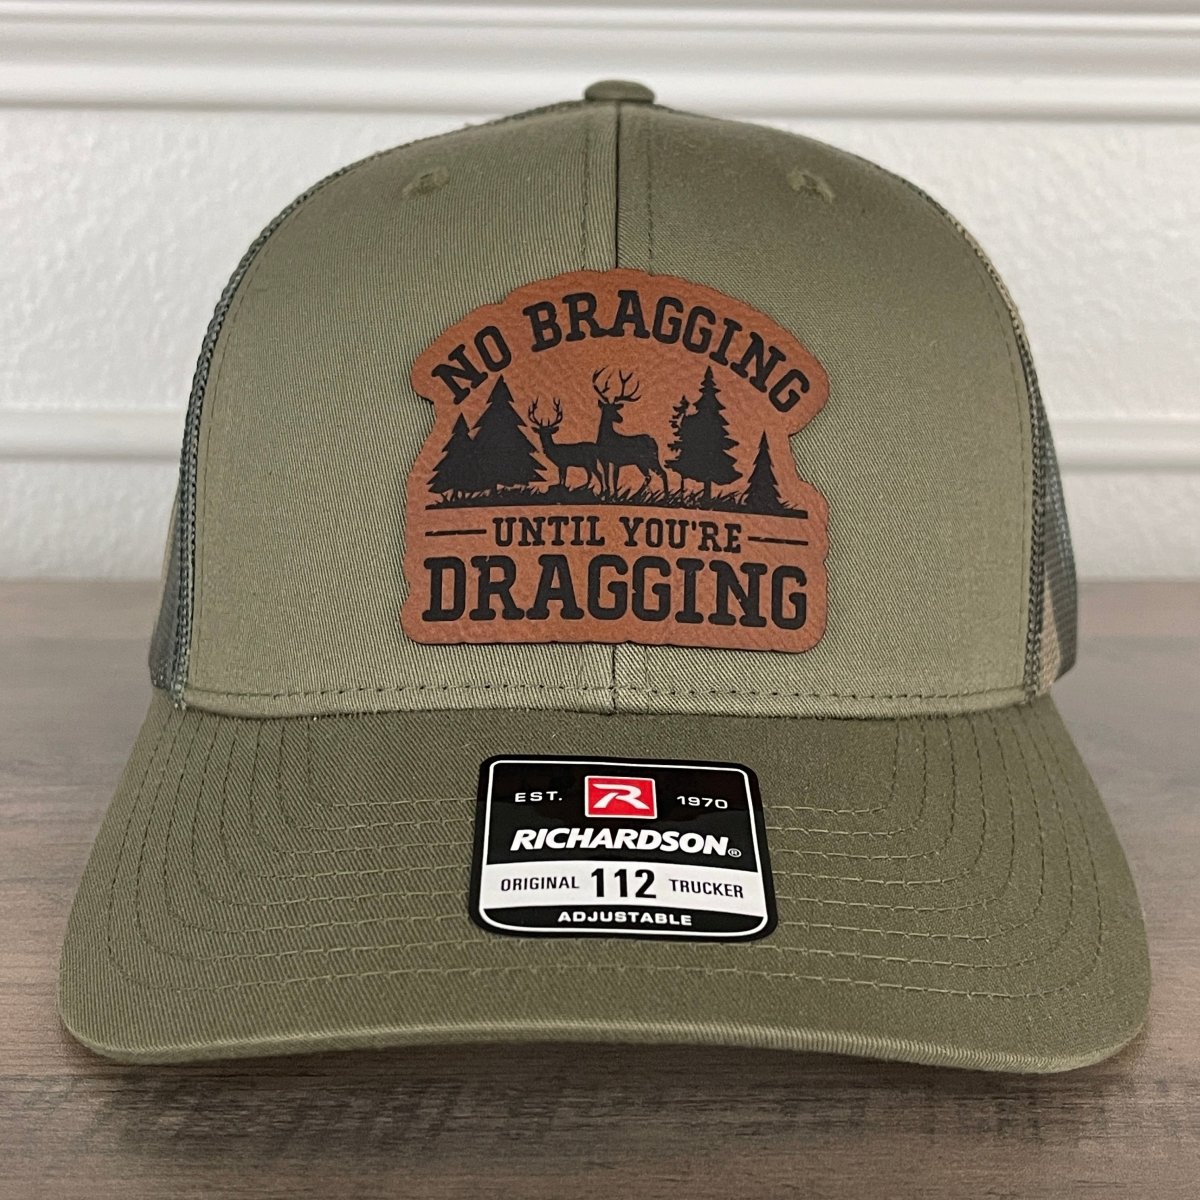 No Bragging Until You're Dragging Deer Hunting Funny Leather Patch Hat Green/Camo Patch Hat - VividEditions